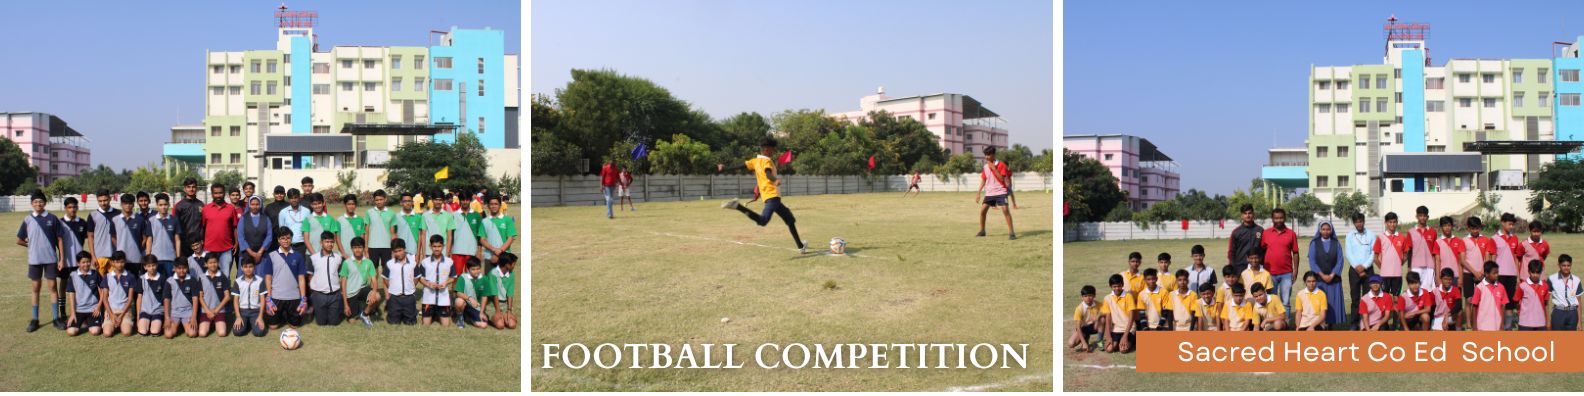 FOOTBALL_COMPETITION_FRONT.jpg